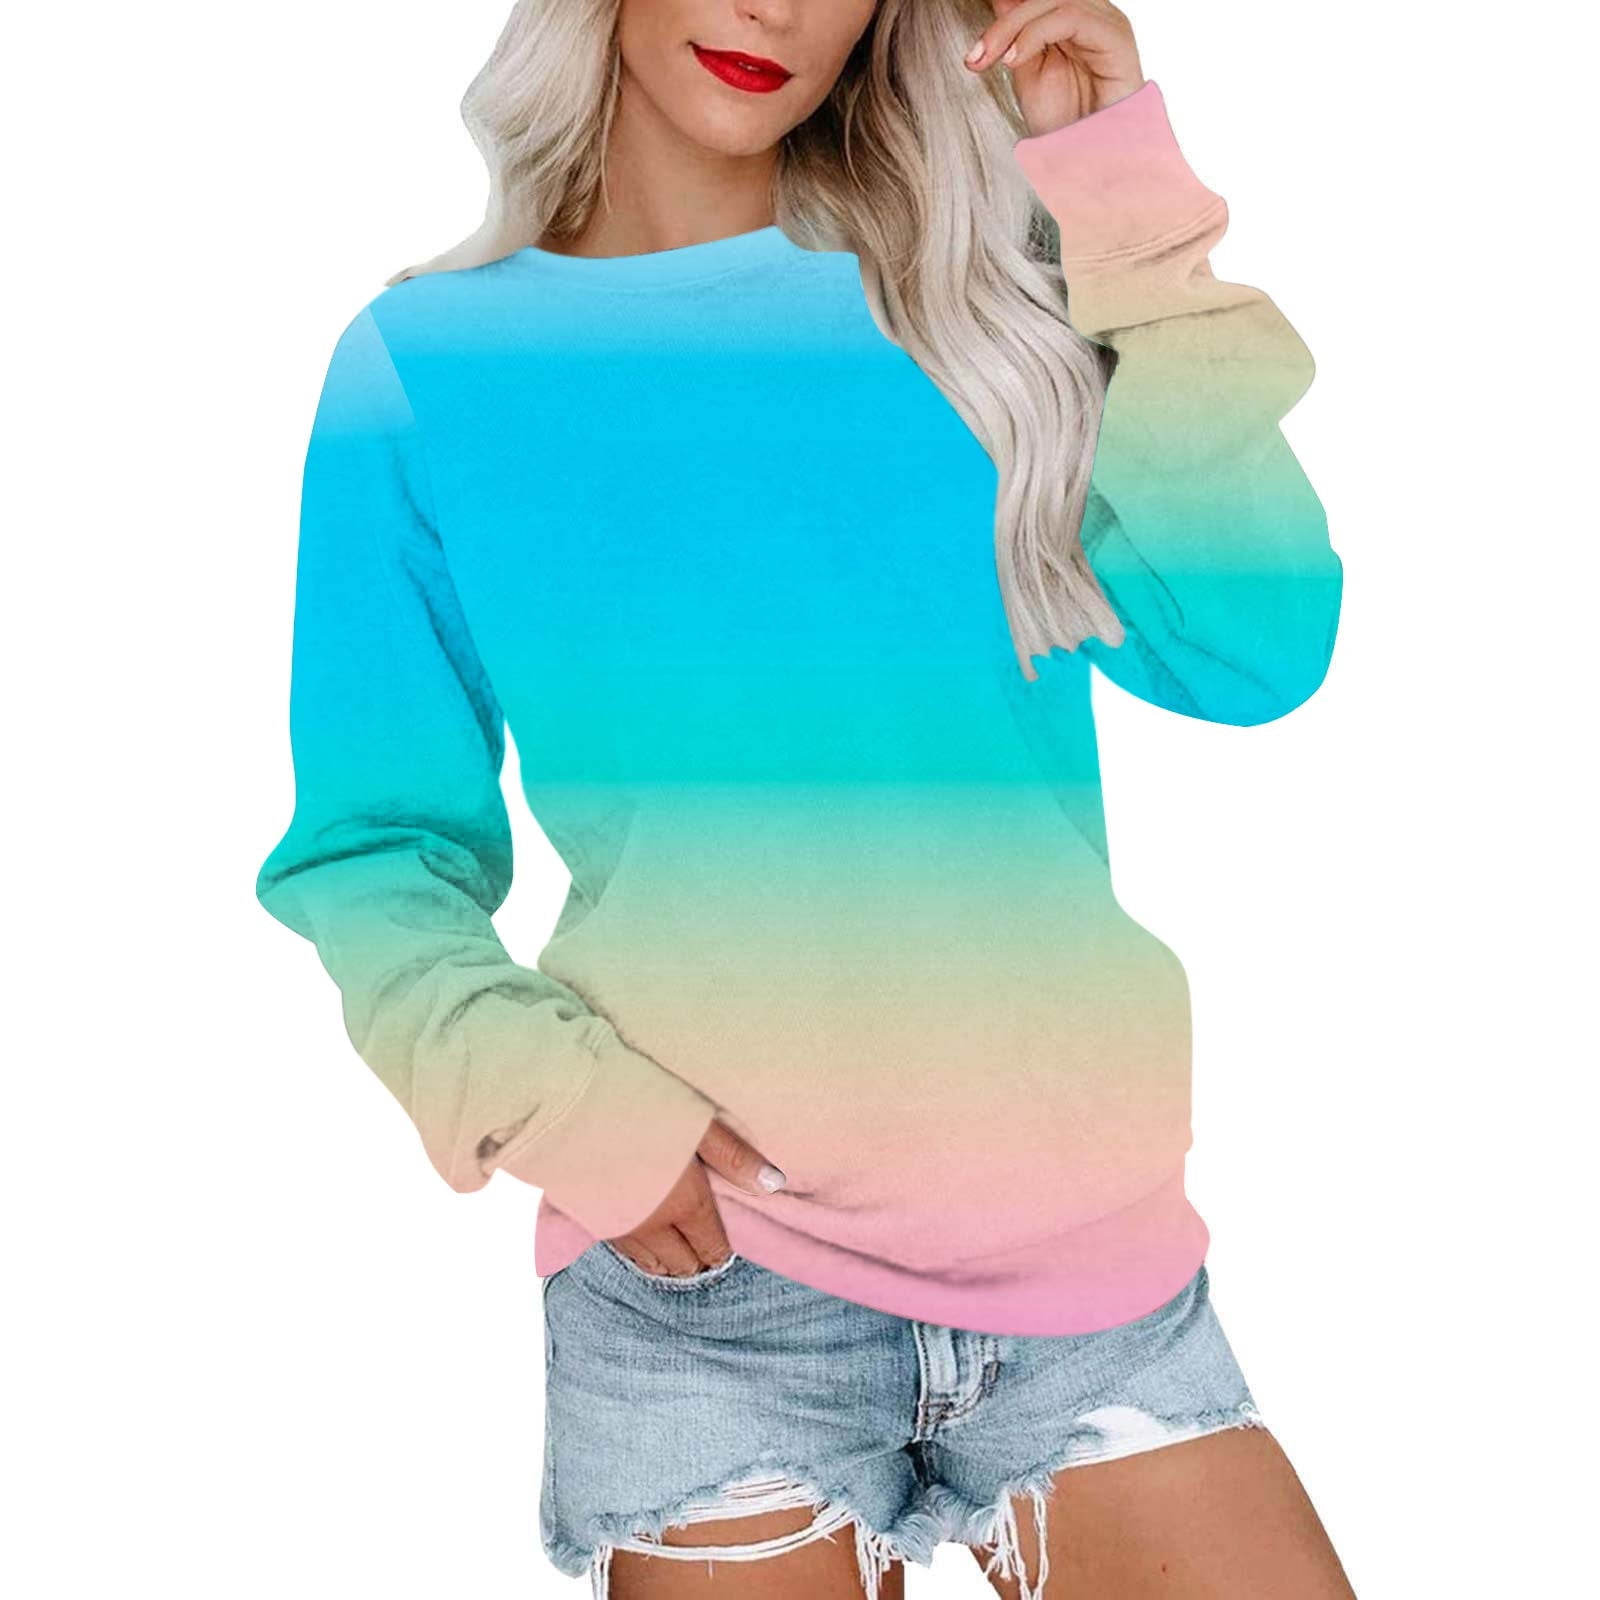 overstock items clearance all prime,Womens Oversized Sweatshirts